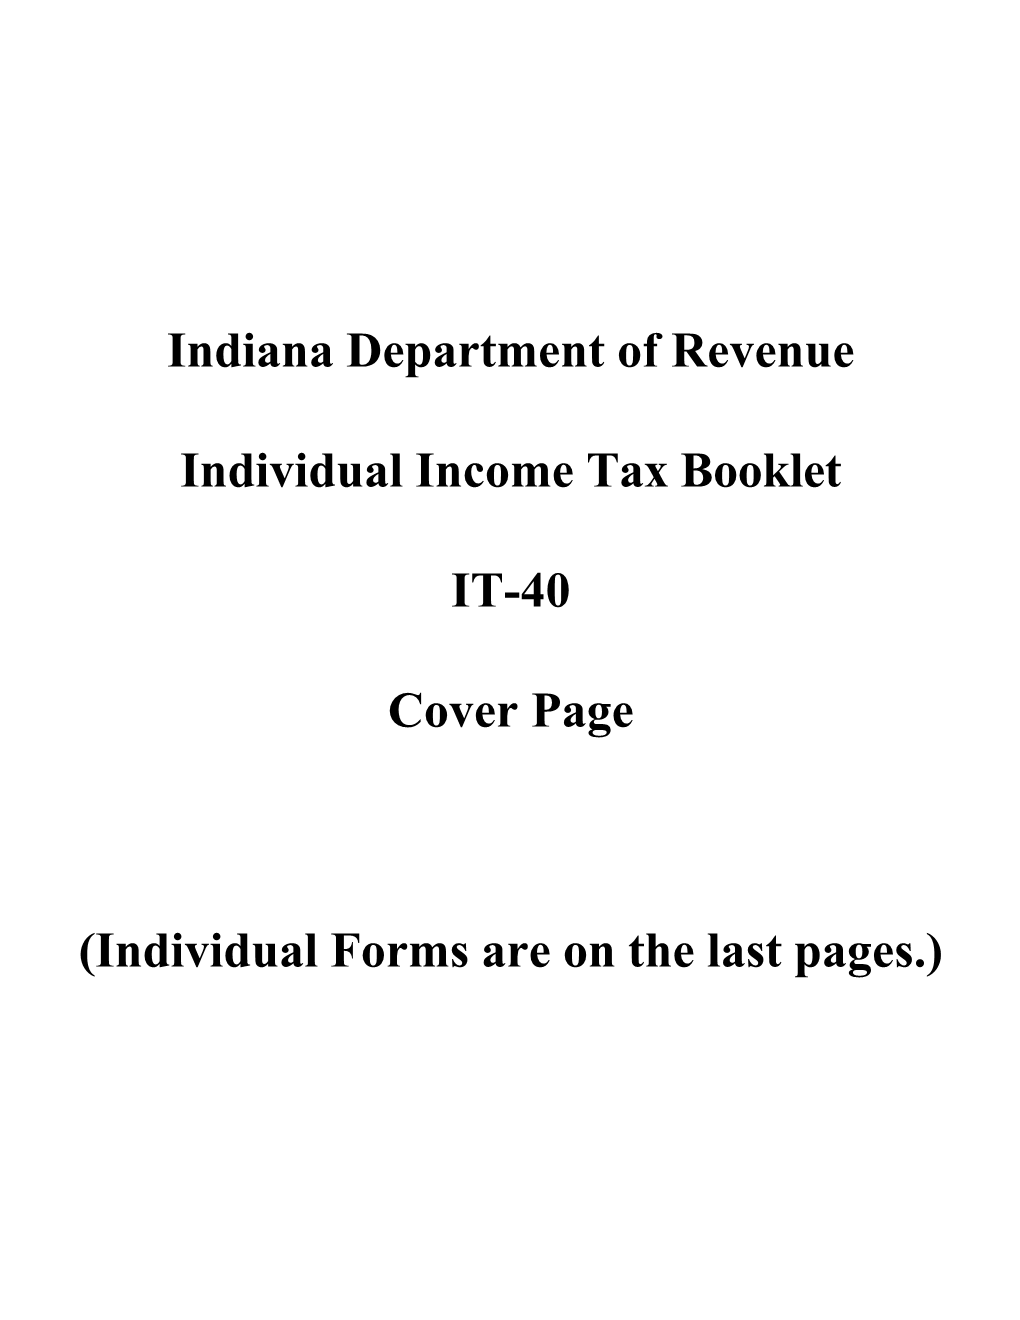 Indiana Department of Revenue Individual Income Tax Booklet IT-40 Cover Page